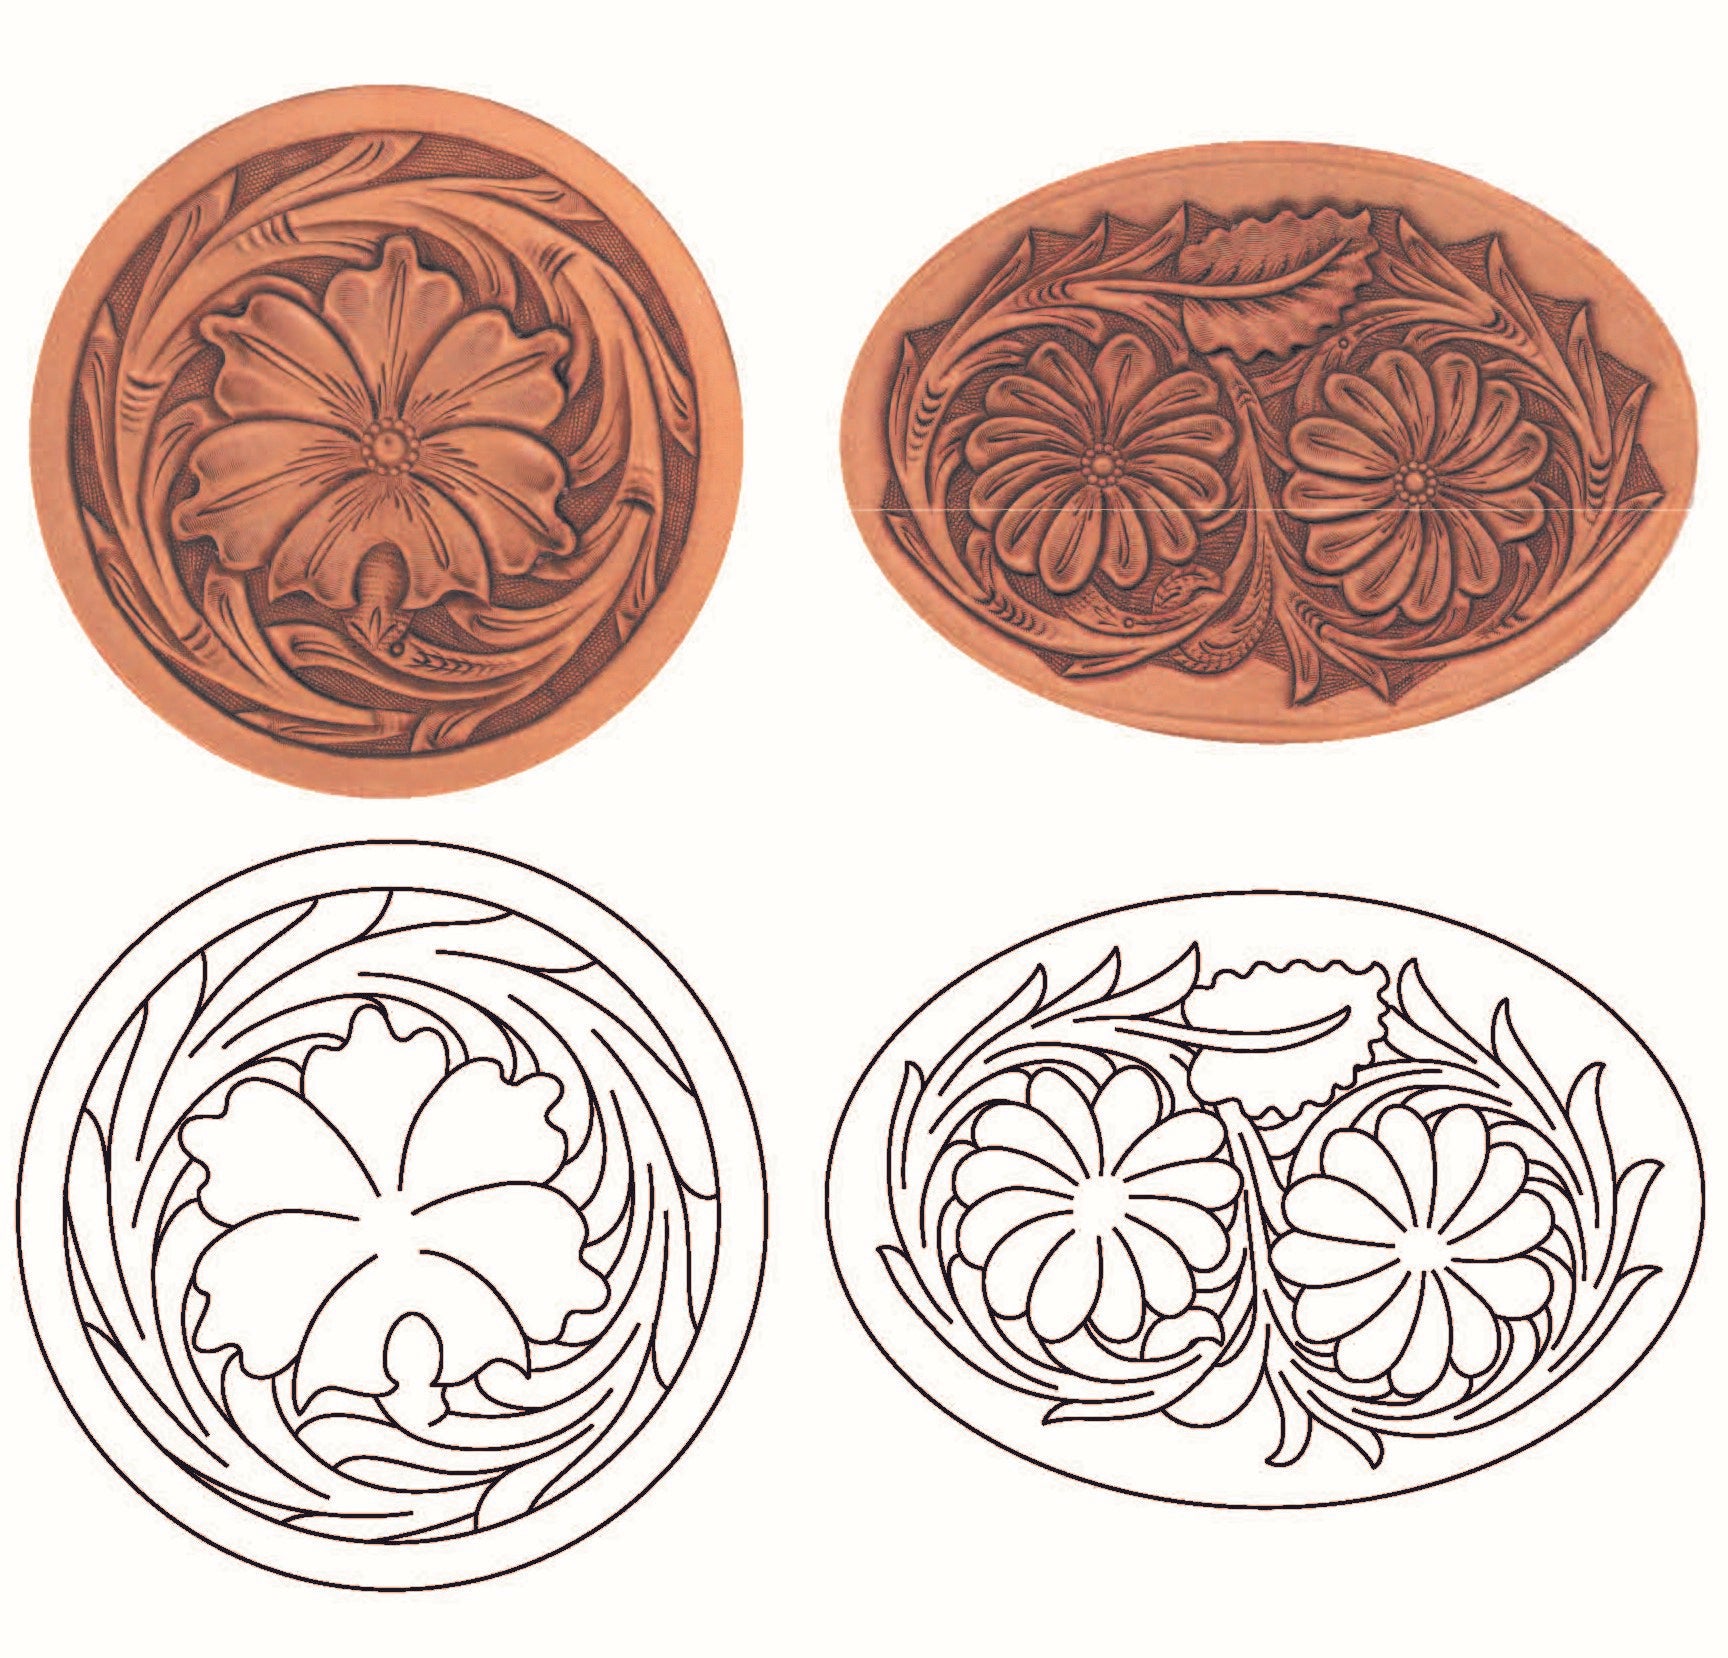 leather tooling patterns printable  Leather working patterns, Leather  tooling patterns, Tooling patterns